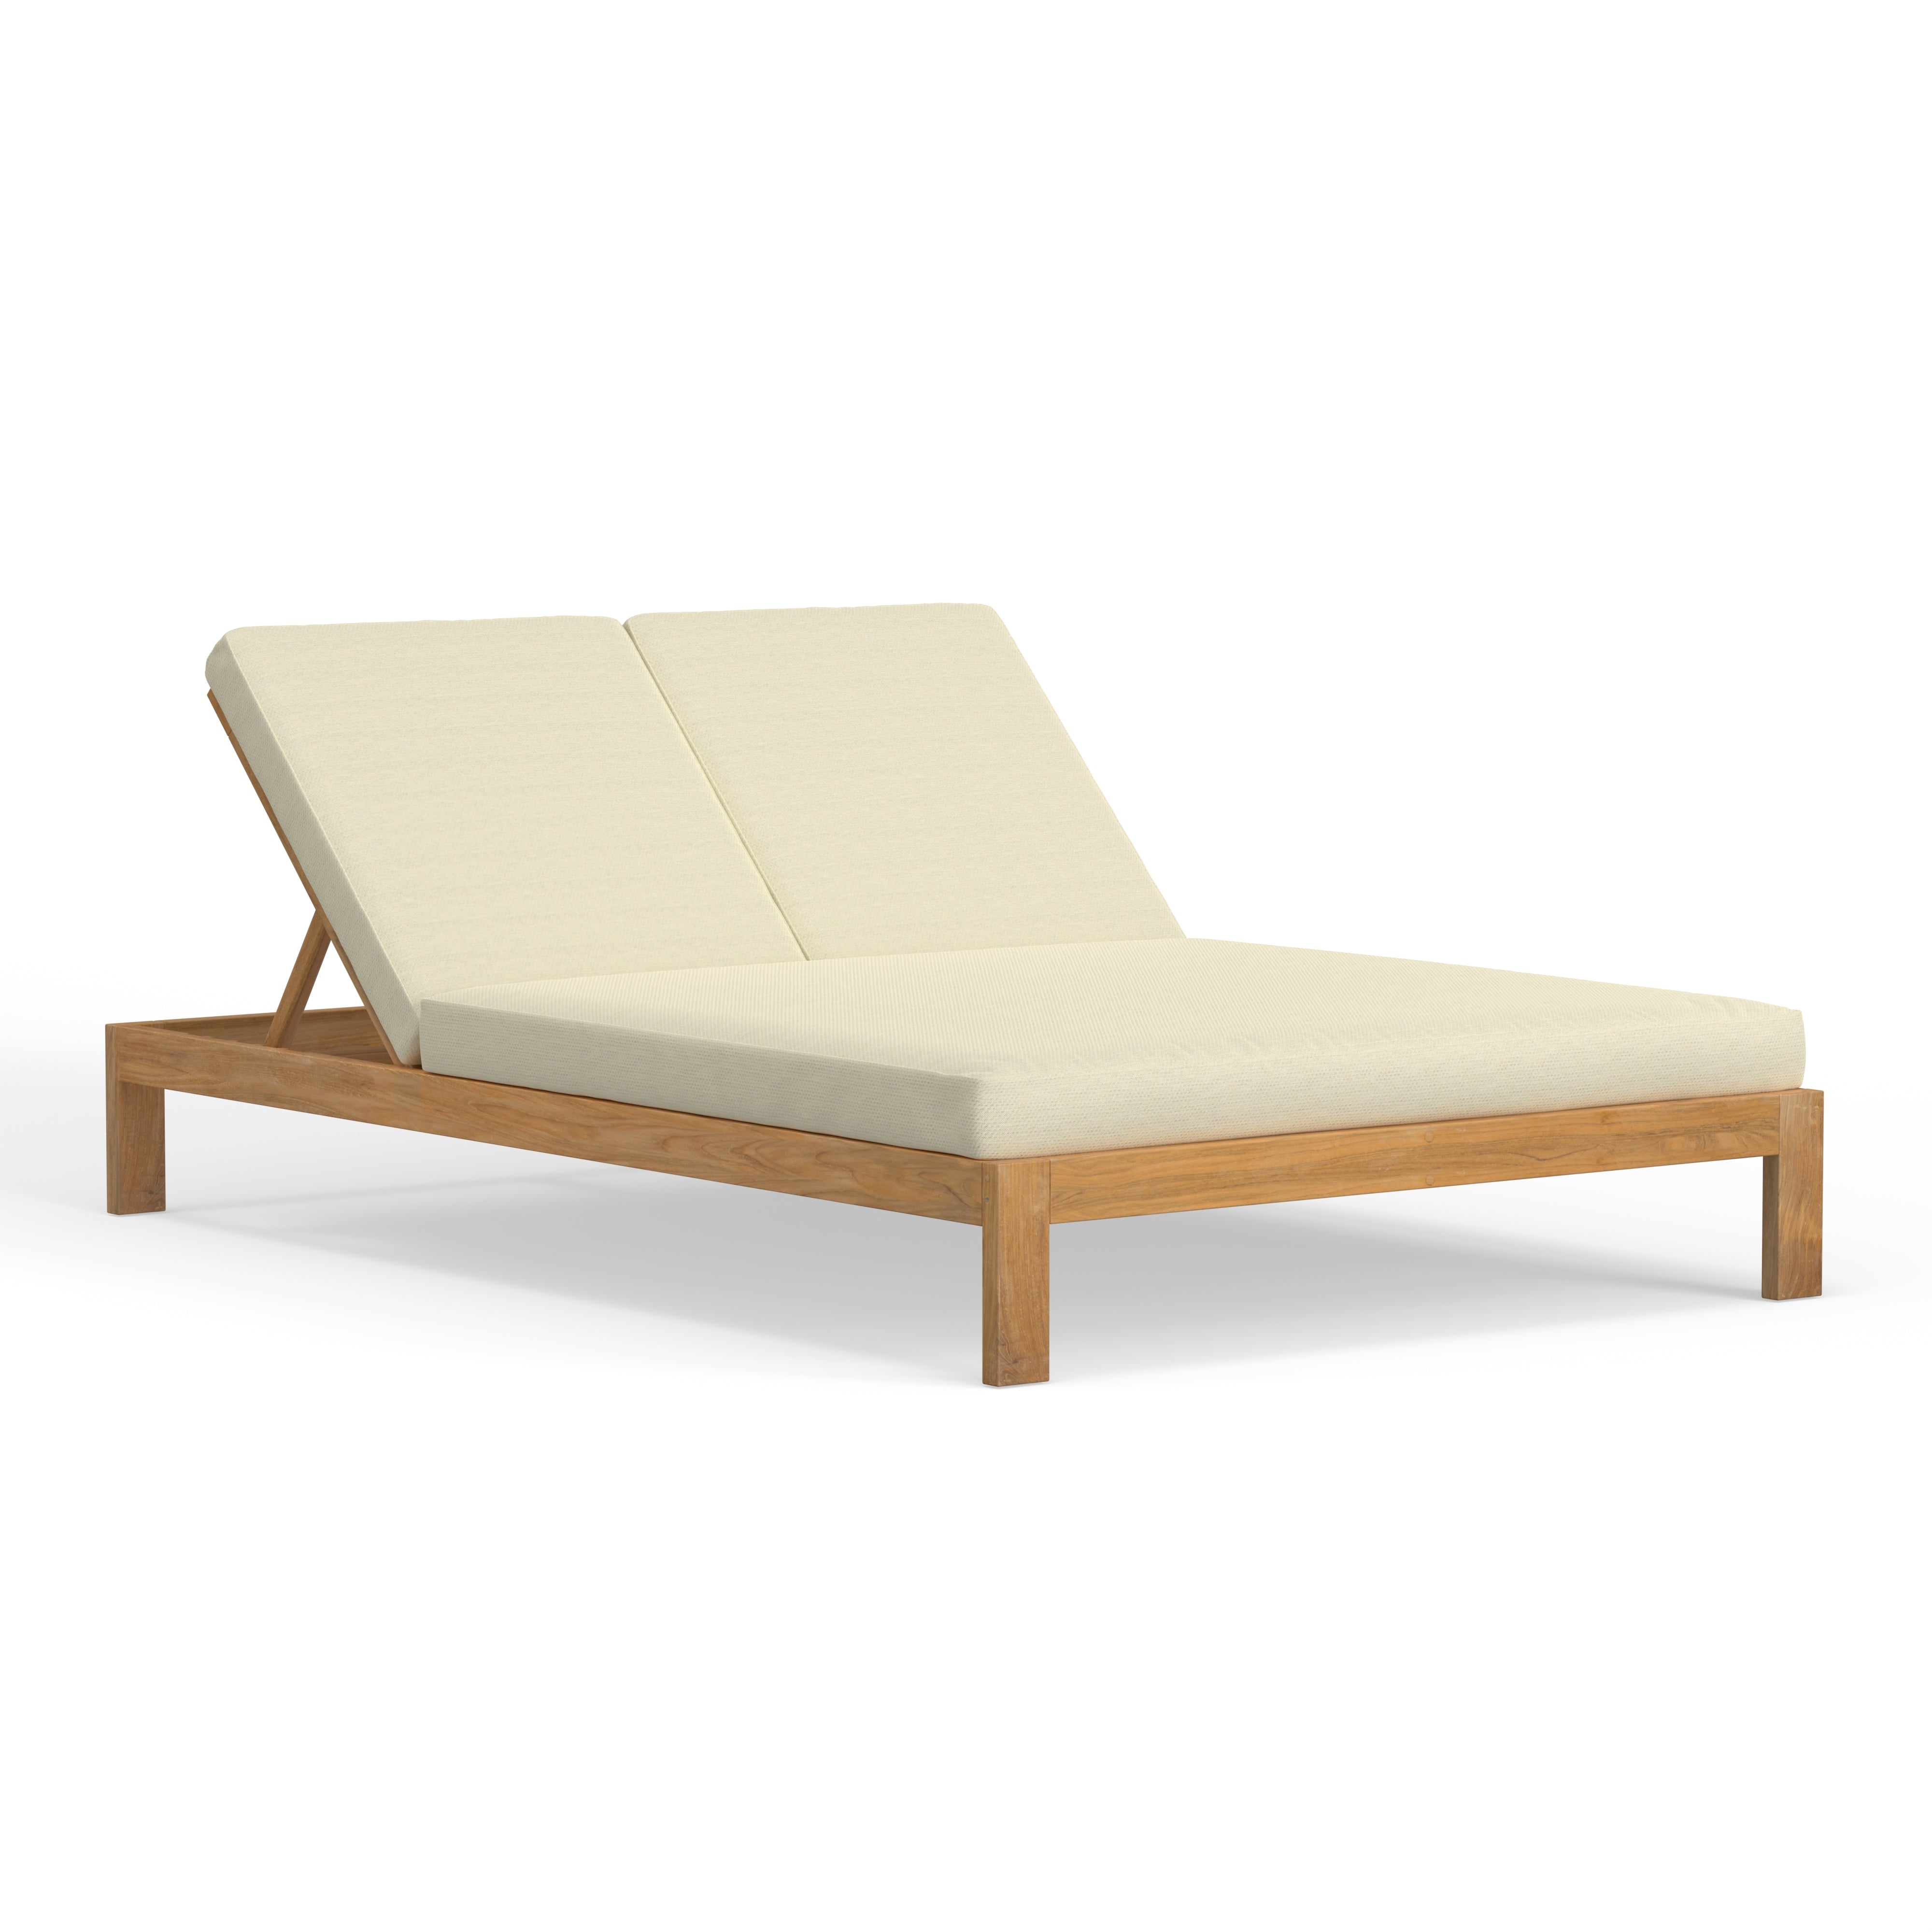 Best Looking Teak Double Chaise Lounge For Two